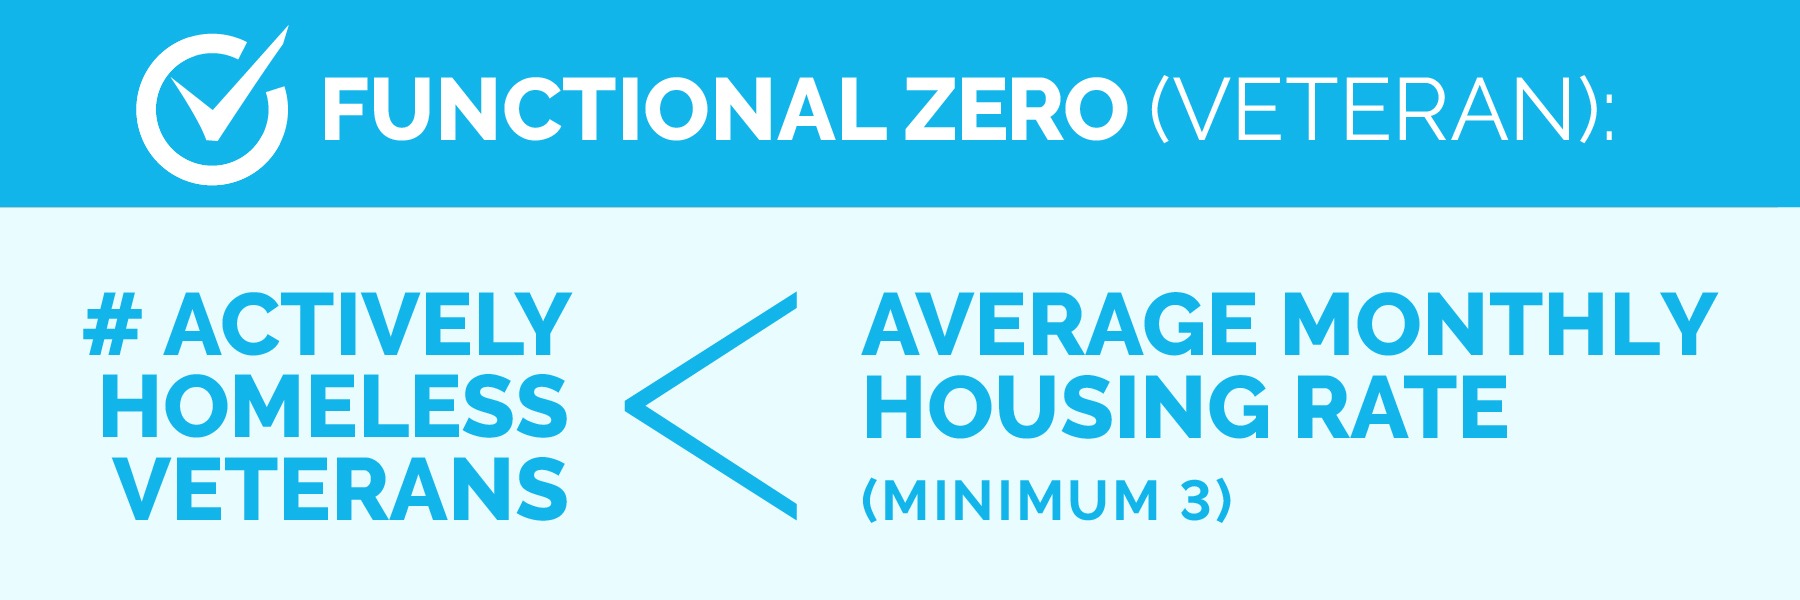 Functional zero for veteran homelessness means that fewer veterans are experiencing homelessness than can be routinely housed in a month, with a minimum threshold of 3 veterans.